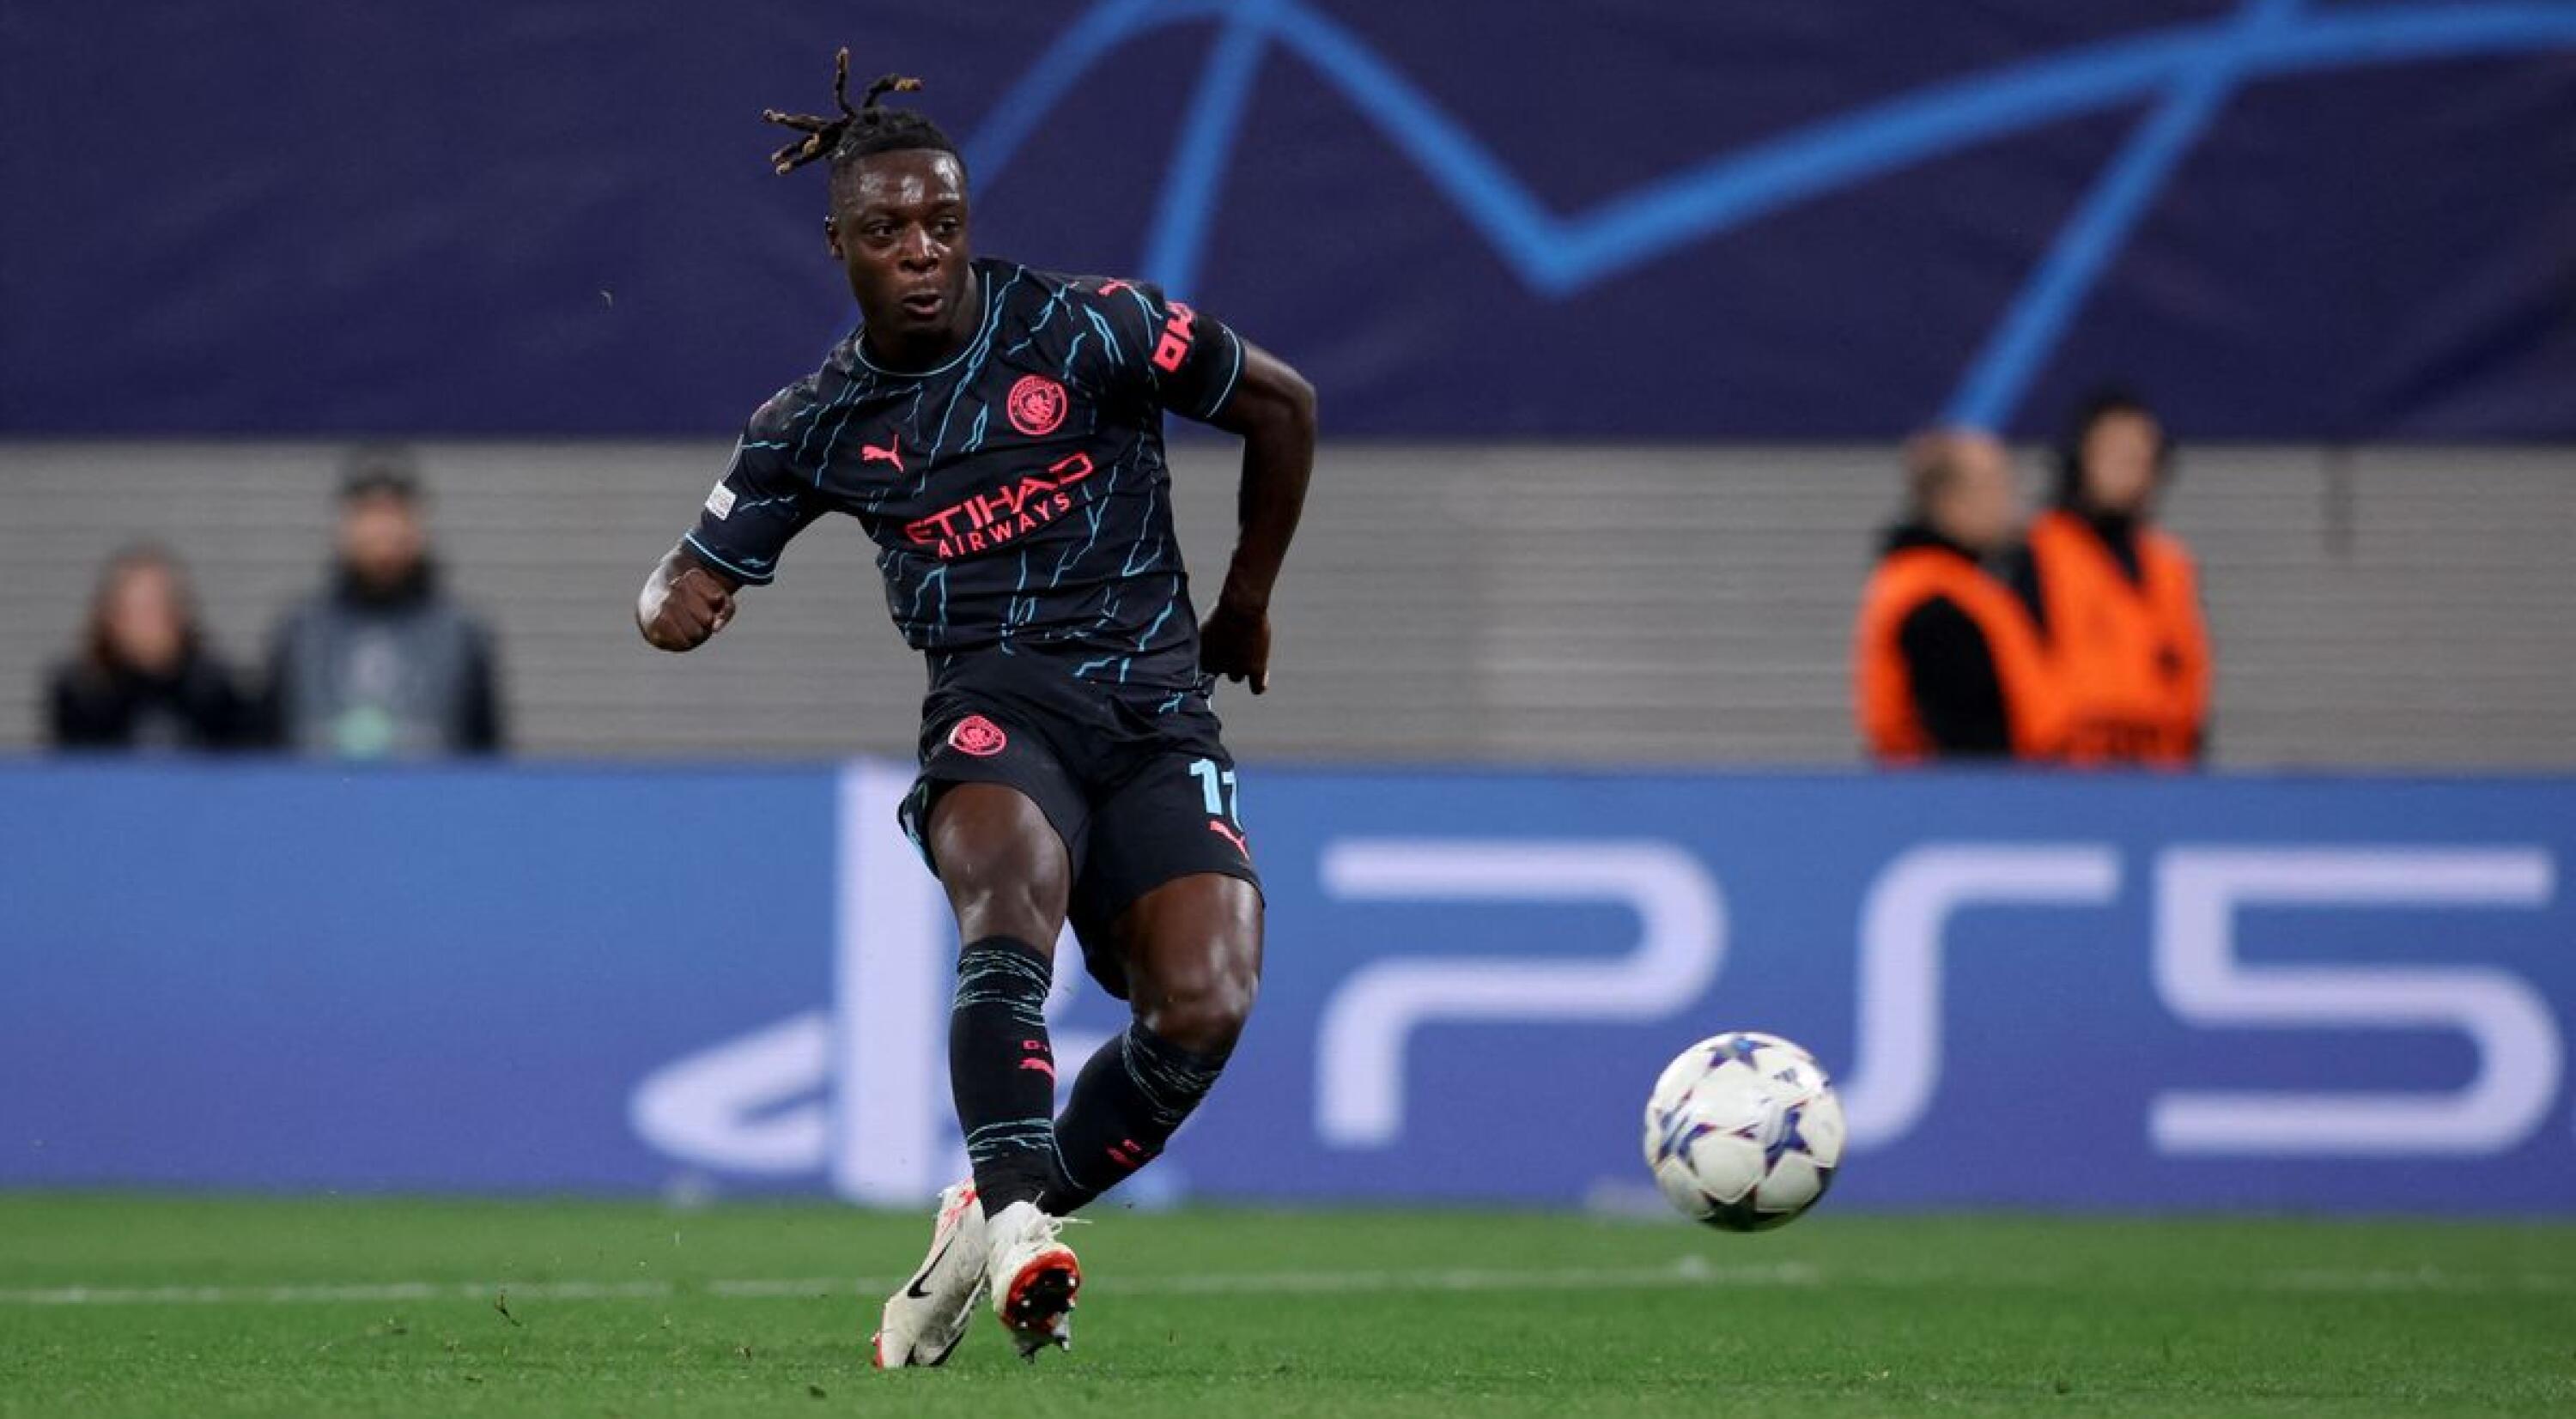 Manchester City's Belgian midfielder #11 Jeremy Doku shoots the ball to score the 1-3 goal during the UEFA Champions League Group G football match between RB Leipzig and Manchester City in Leipzig, eastern Germany